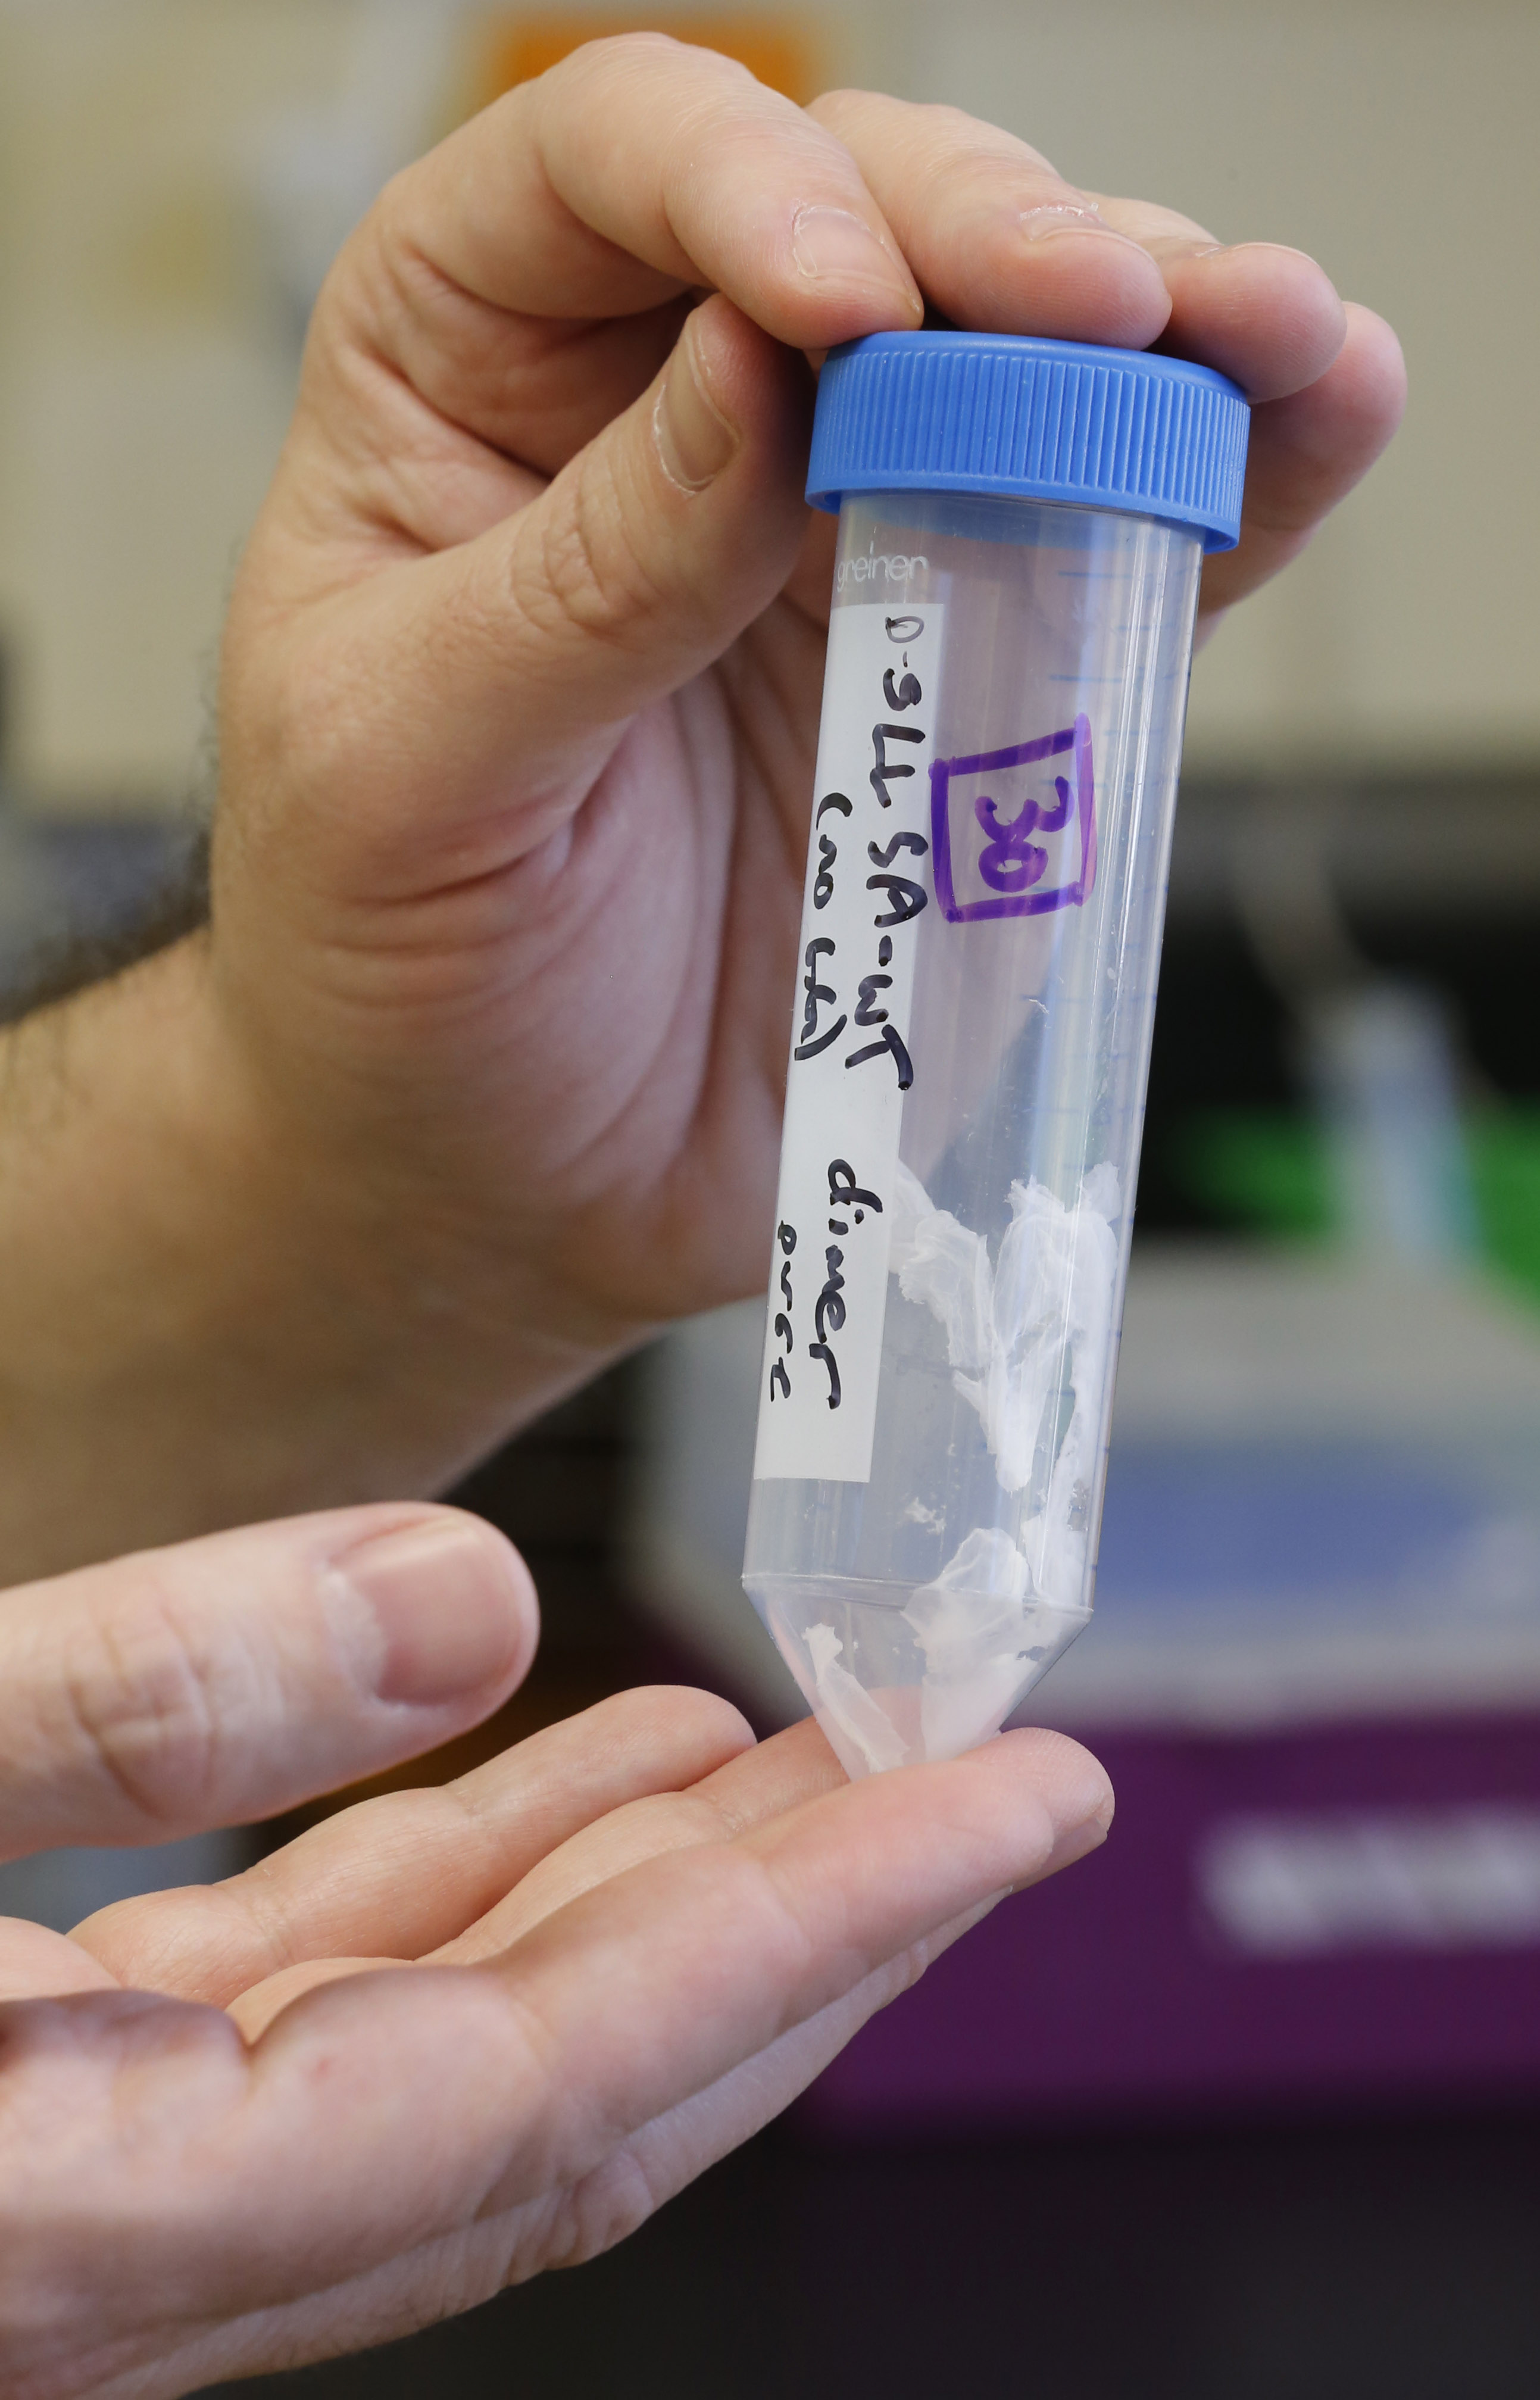 A container holds a Peptide that contains a potential new drug candidates for testing against a part of Ebola that is vulnerable to drugs, at the University of Utah on Oct. 14, 2014 in Salt Lake City. (George Frey—Getty Images)